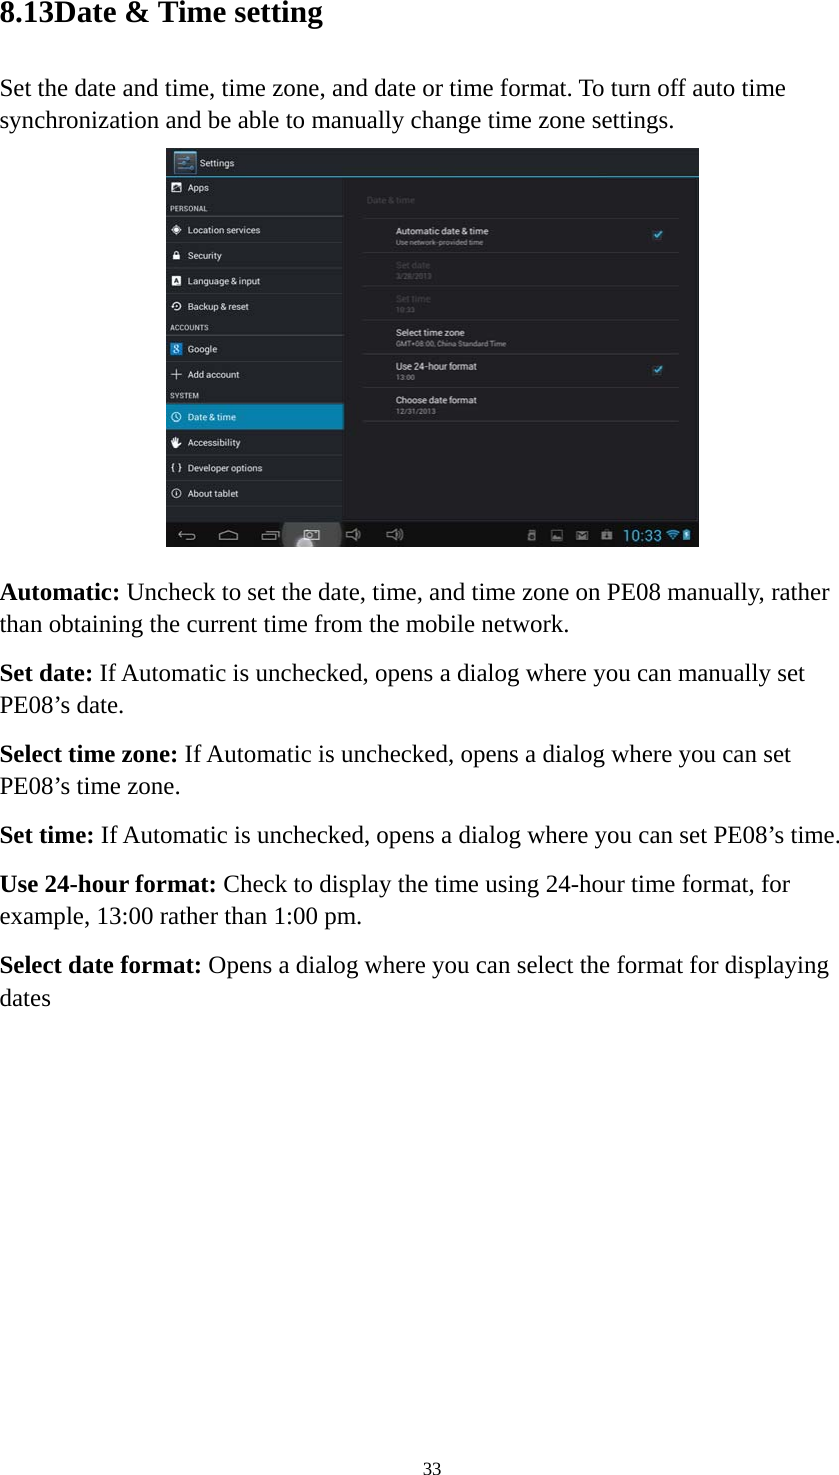 33 8.13Date &amp; Time setting Set the date and time, time zone, and date or time format. To turn off auto time synchronization and be able to manually change time zone settings.  Automatic: Uncheck to set the date, time, and time zone on PE08 manually, rather than obtaining the current time from the mobile network.   Set date: If Automatic is unchecked, opens a dialog where you can manually set PE08’s date. Select time zone: If Automatic is unchecked, opens a dialog where you can set PE08’s time zone. Set time: If Automatic is unchecked, opens a dialog where you can set PE08’s time. Use 24-hour format: Check to display the time using 24-hour time format, for example, 13:00 rather than 1:00 pm. Select date format: Opens a dialog where you can select the format for displaying dates 